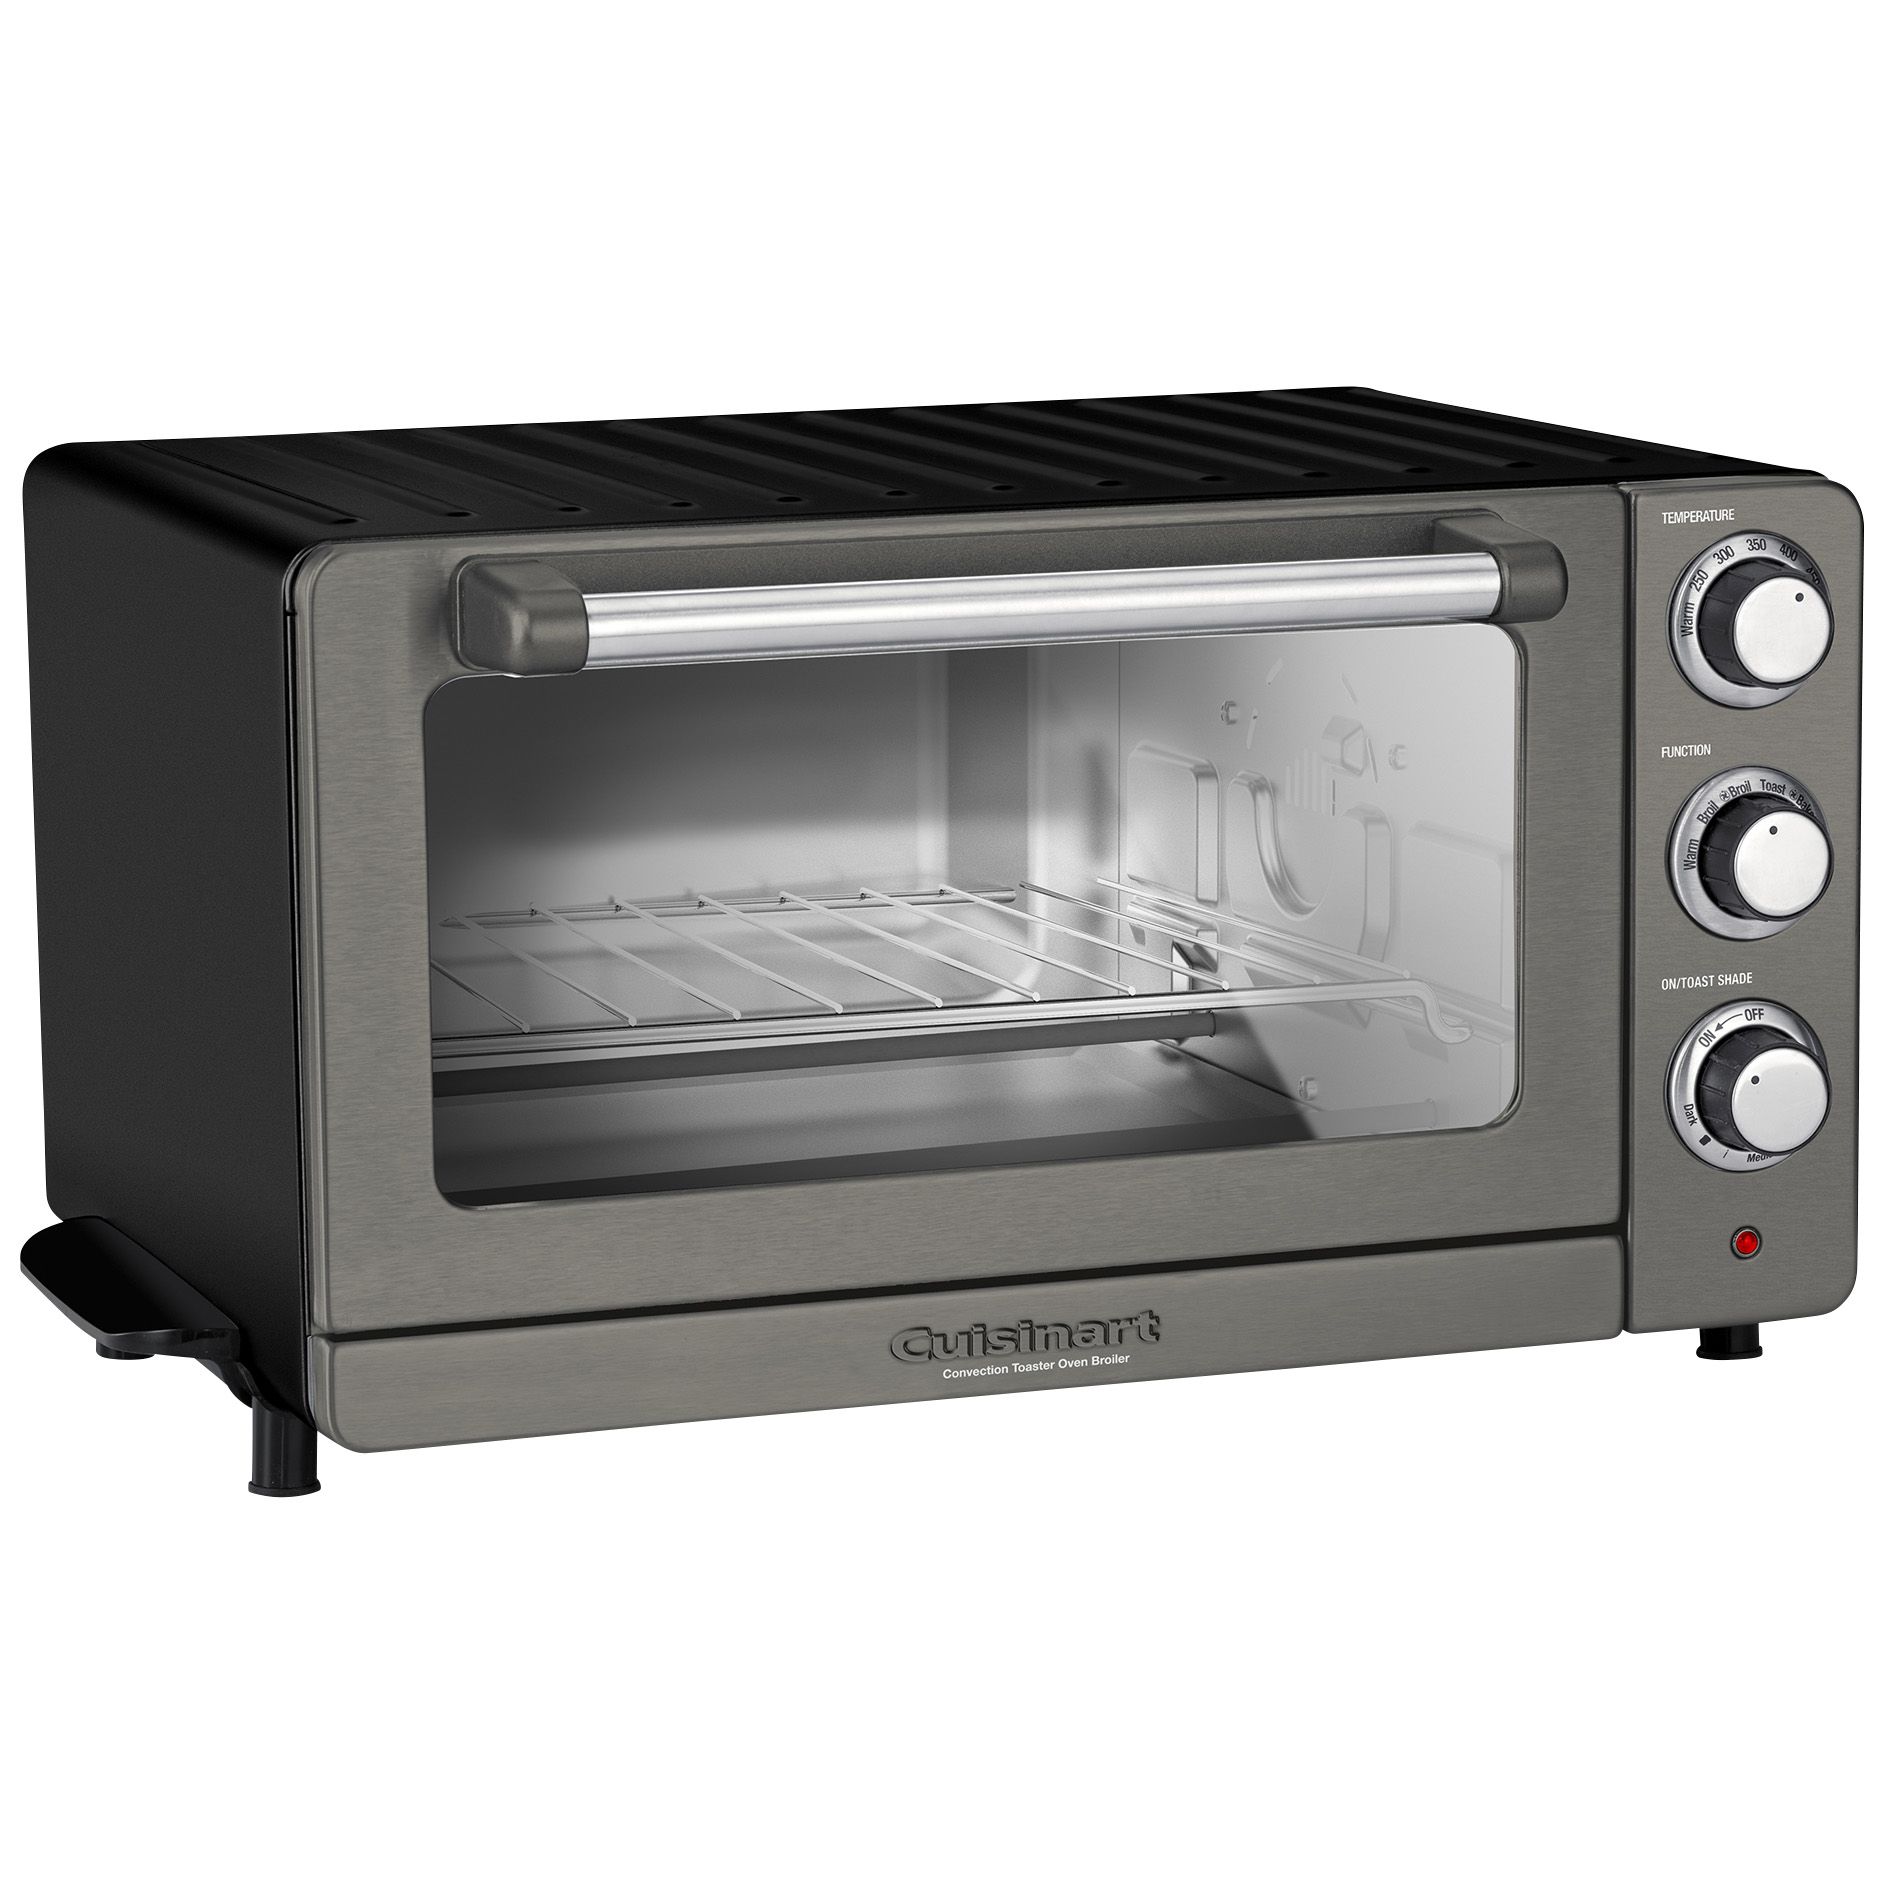 Fingerhut - Chef's Mark Extra-Large Toaster Oven Broiler with Rotisserie